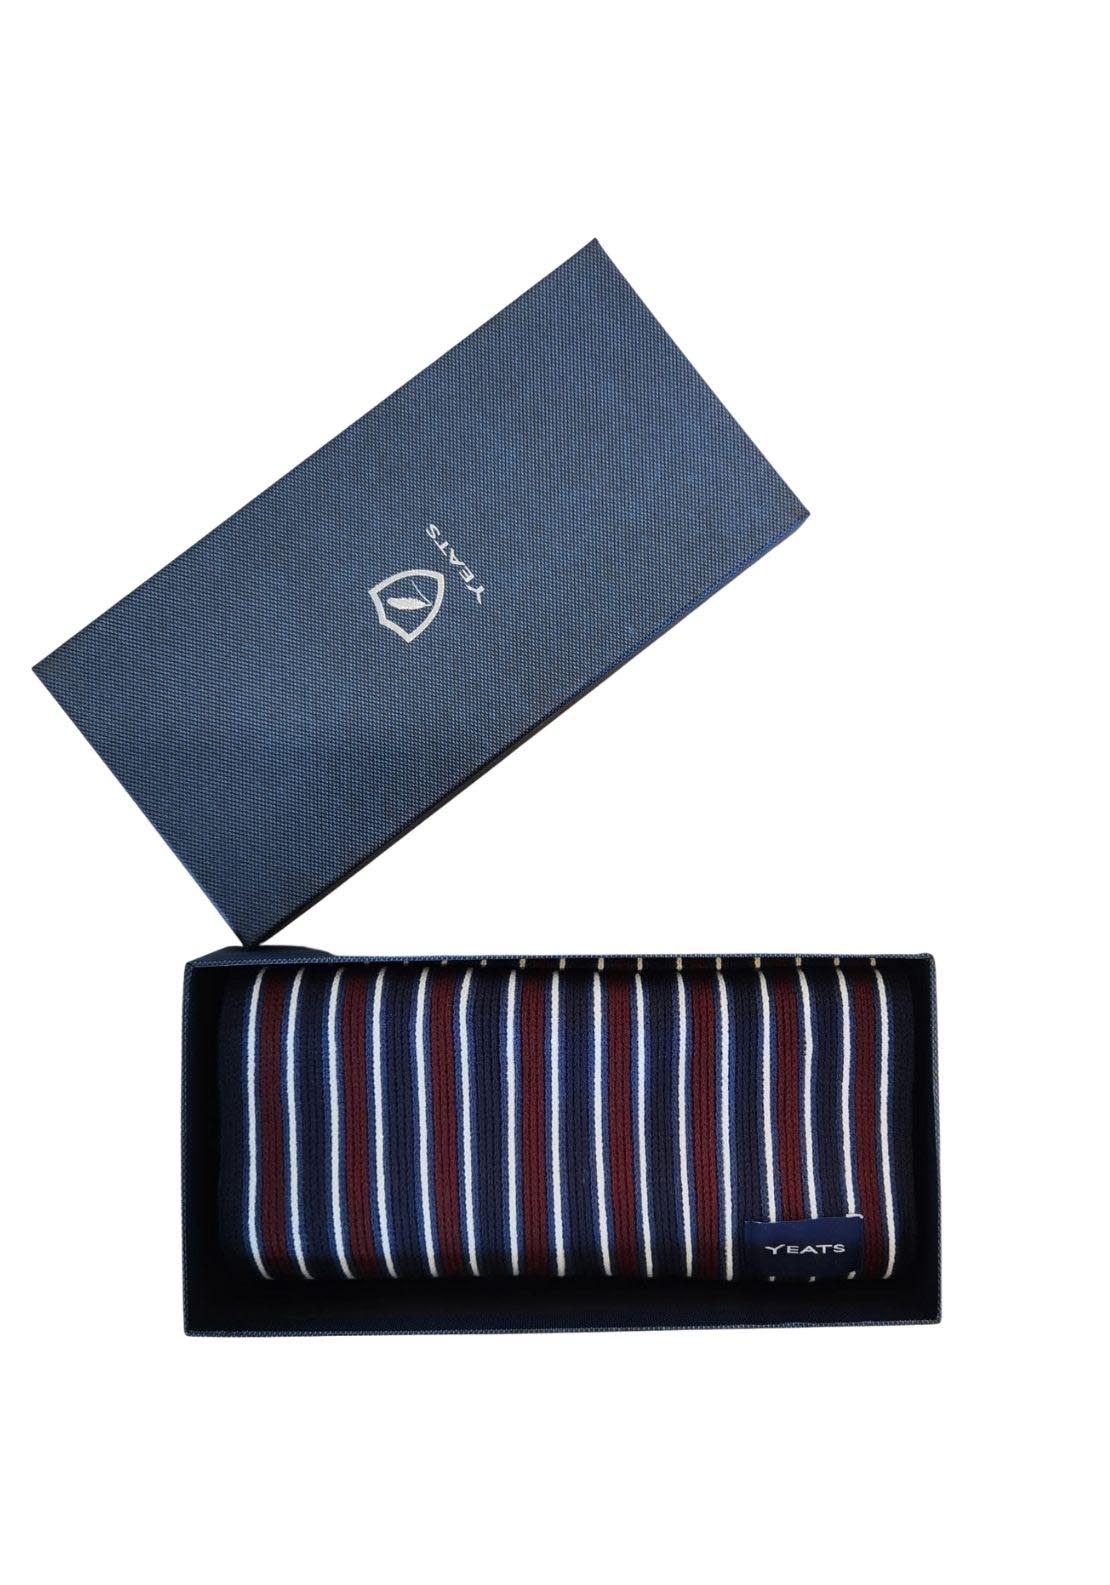 Yeats Boxed Scarves - Navy / Red 1 Shaws Department Stores